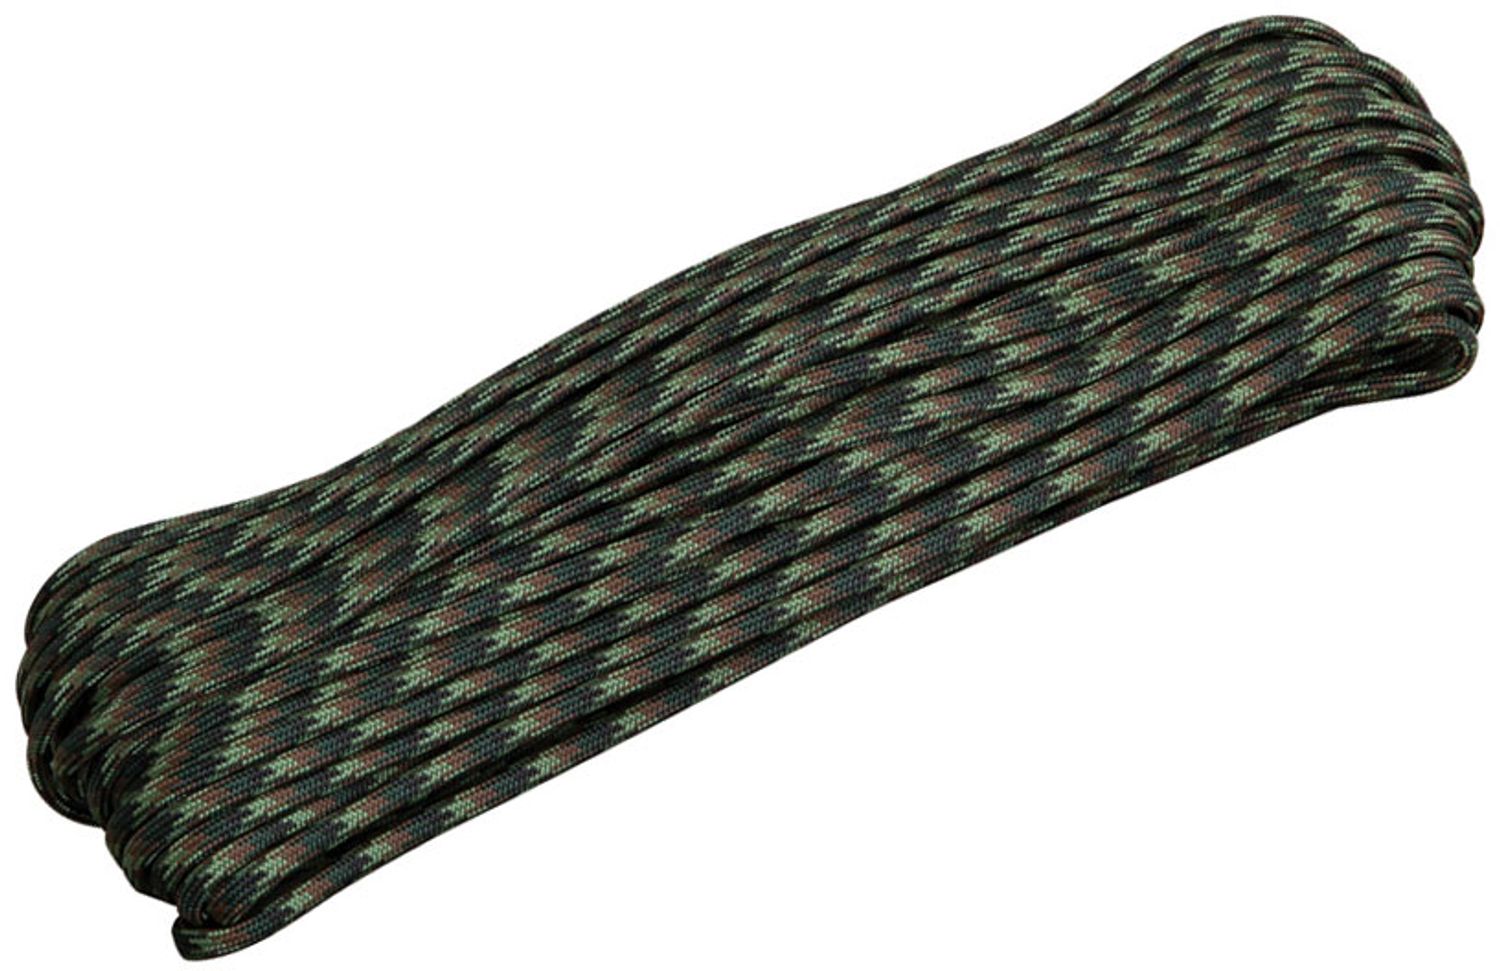 Atwood Rope 550 Paracord, Woodland Camo, 100 Feet - KnifeCenter